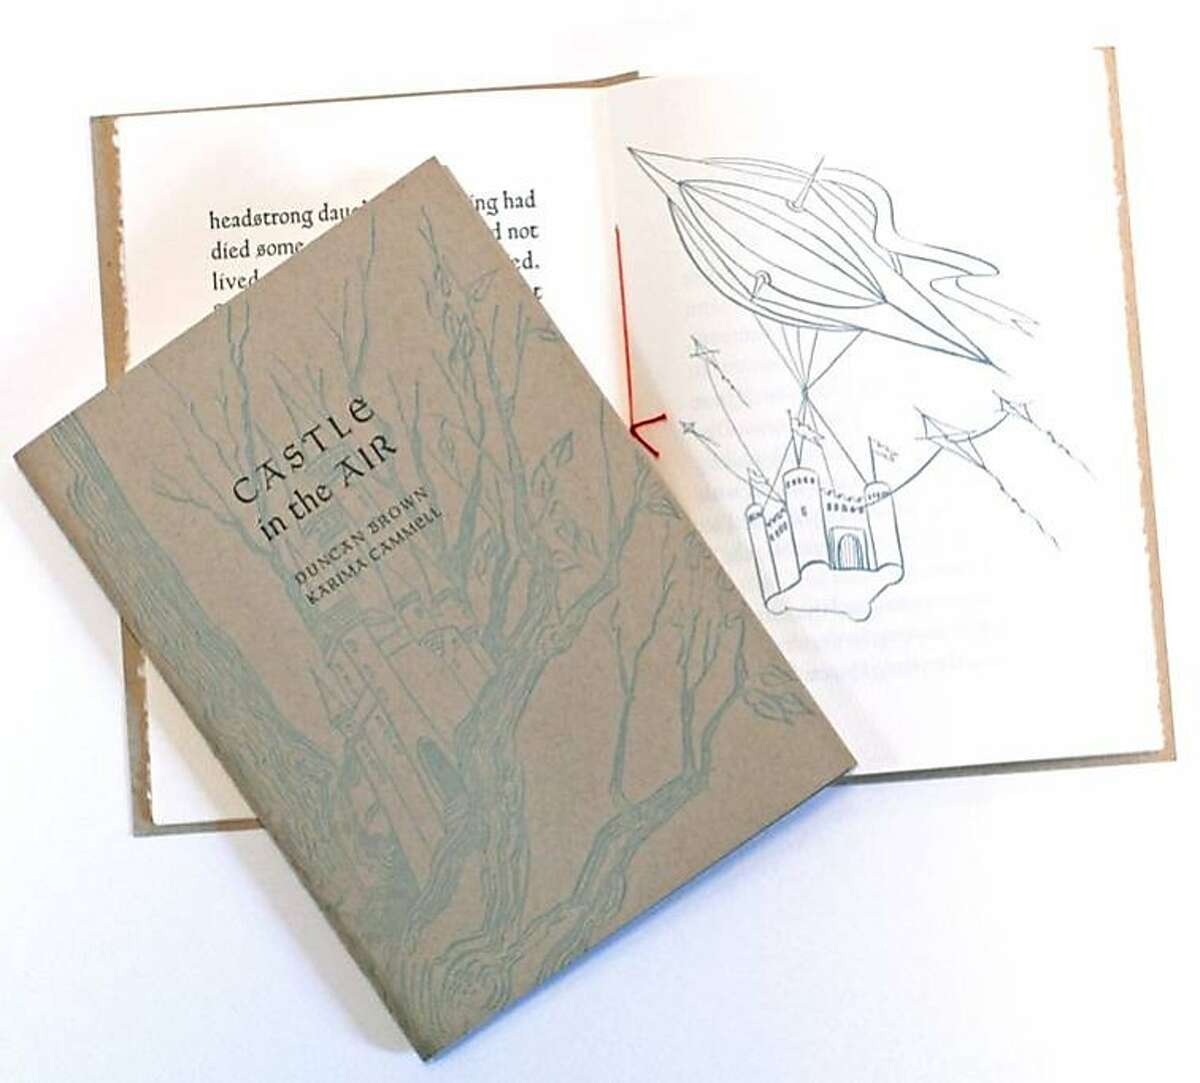 Castle in the Air book: “My first book, ‘Castle in the Air,' was published in collaboration with its author, my husband Duncan Brown (Dromedary Press, 2008). It is letterpress printed and hand-bound to make it a work of art through and through.”